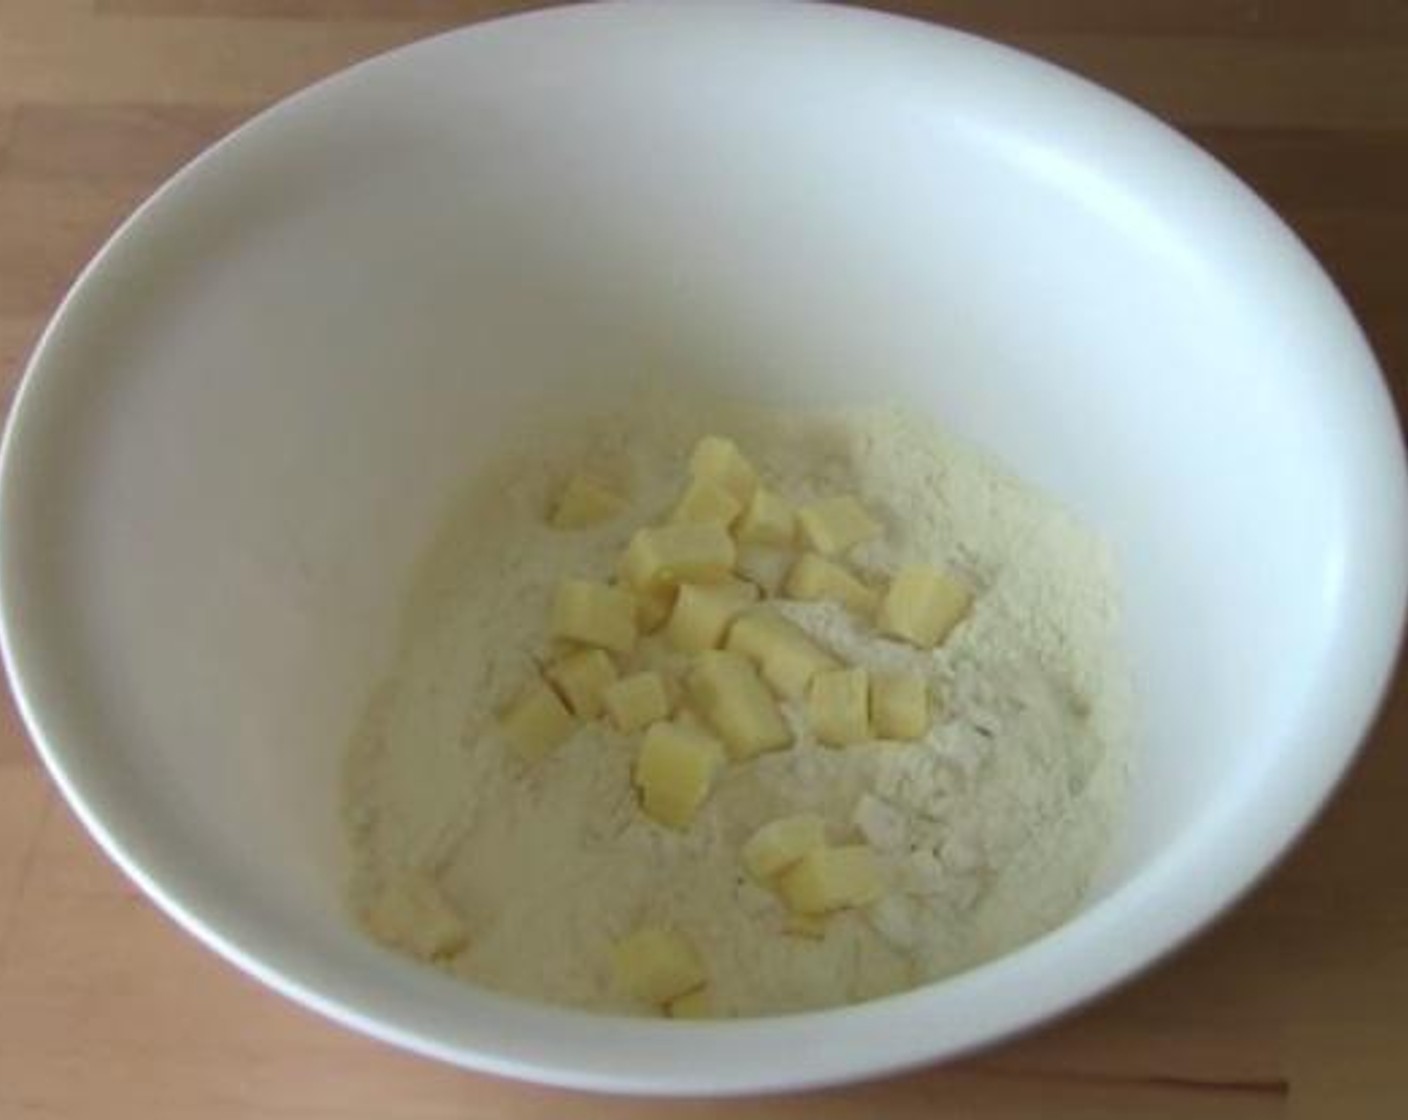 step 1 Inside a mixing bowl, mix together the Self-Rising Flour (3 cups), Salt (to taste) and Butter (5 cups).